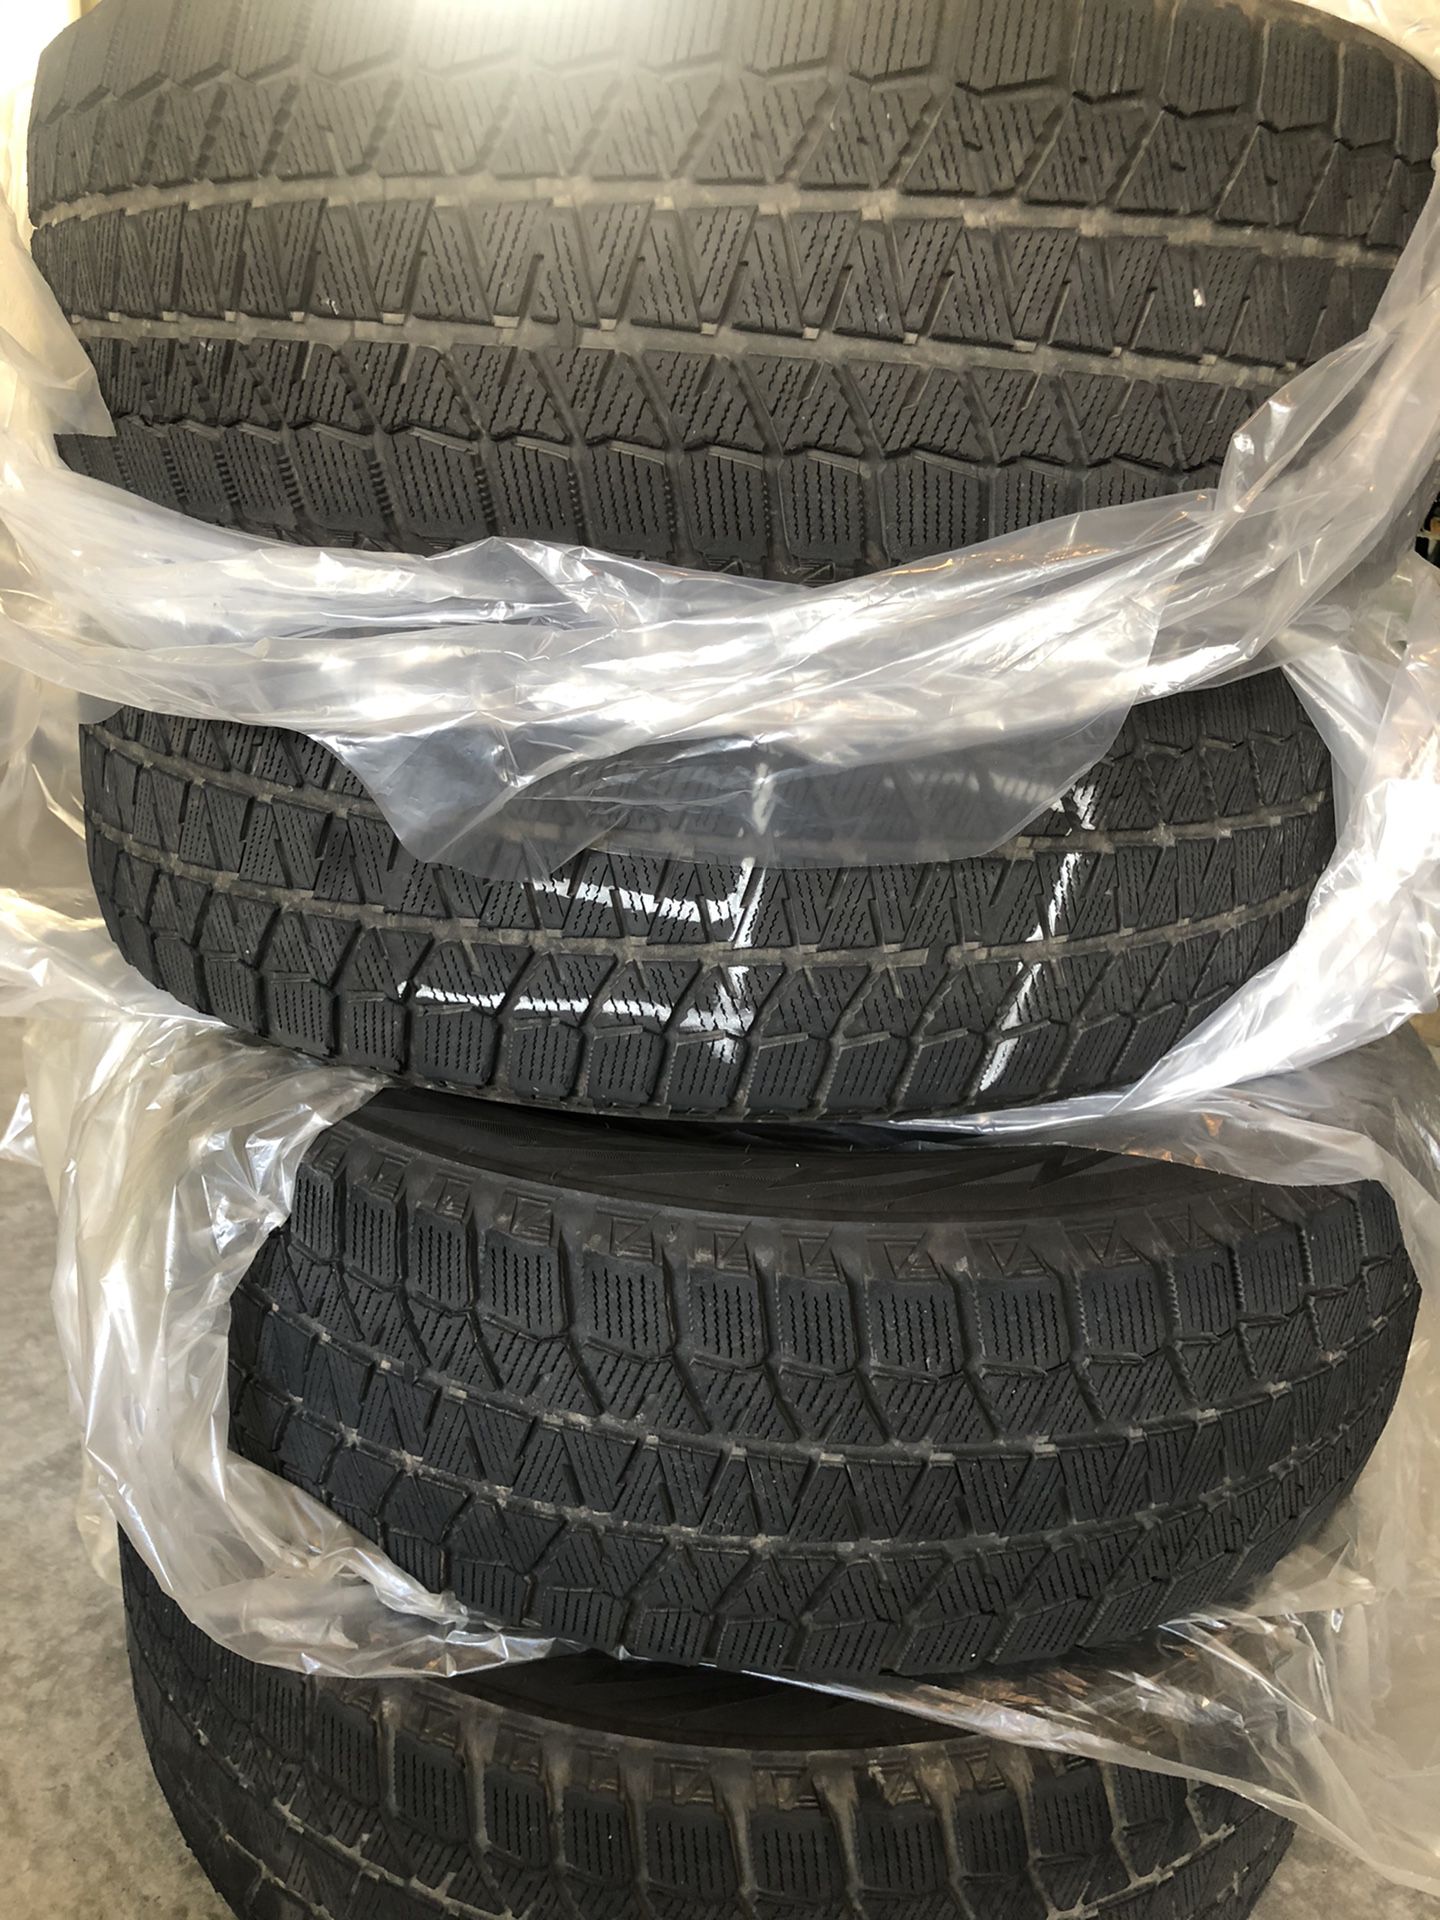 Winter tires for Toyota Sienna - $$Reduced Price